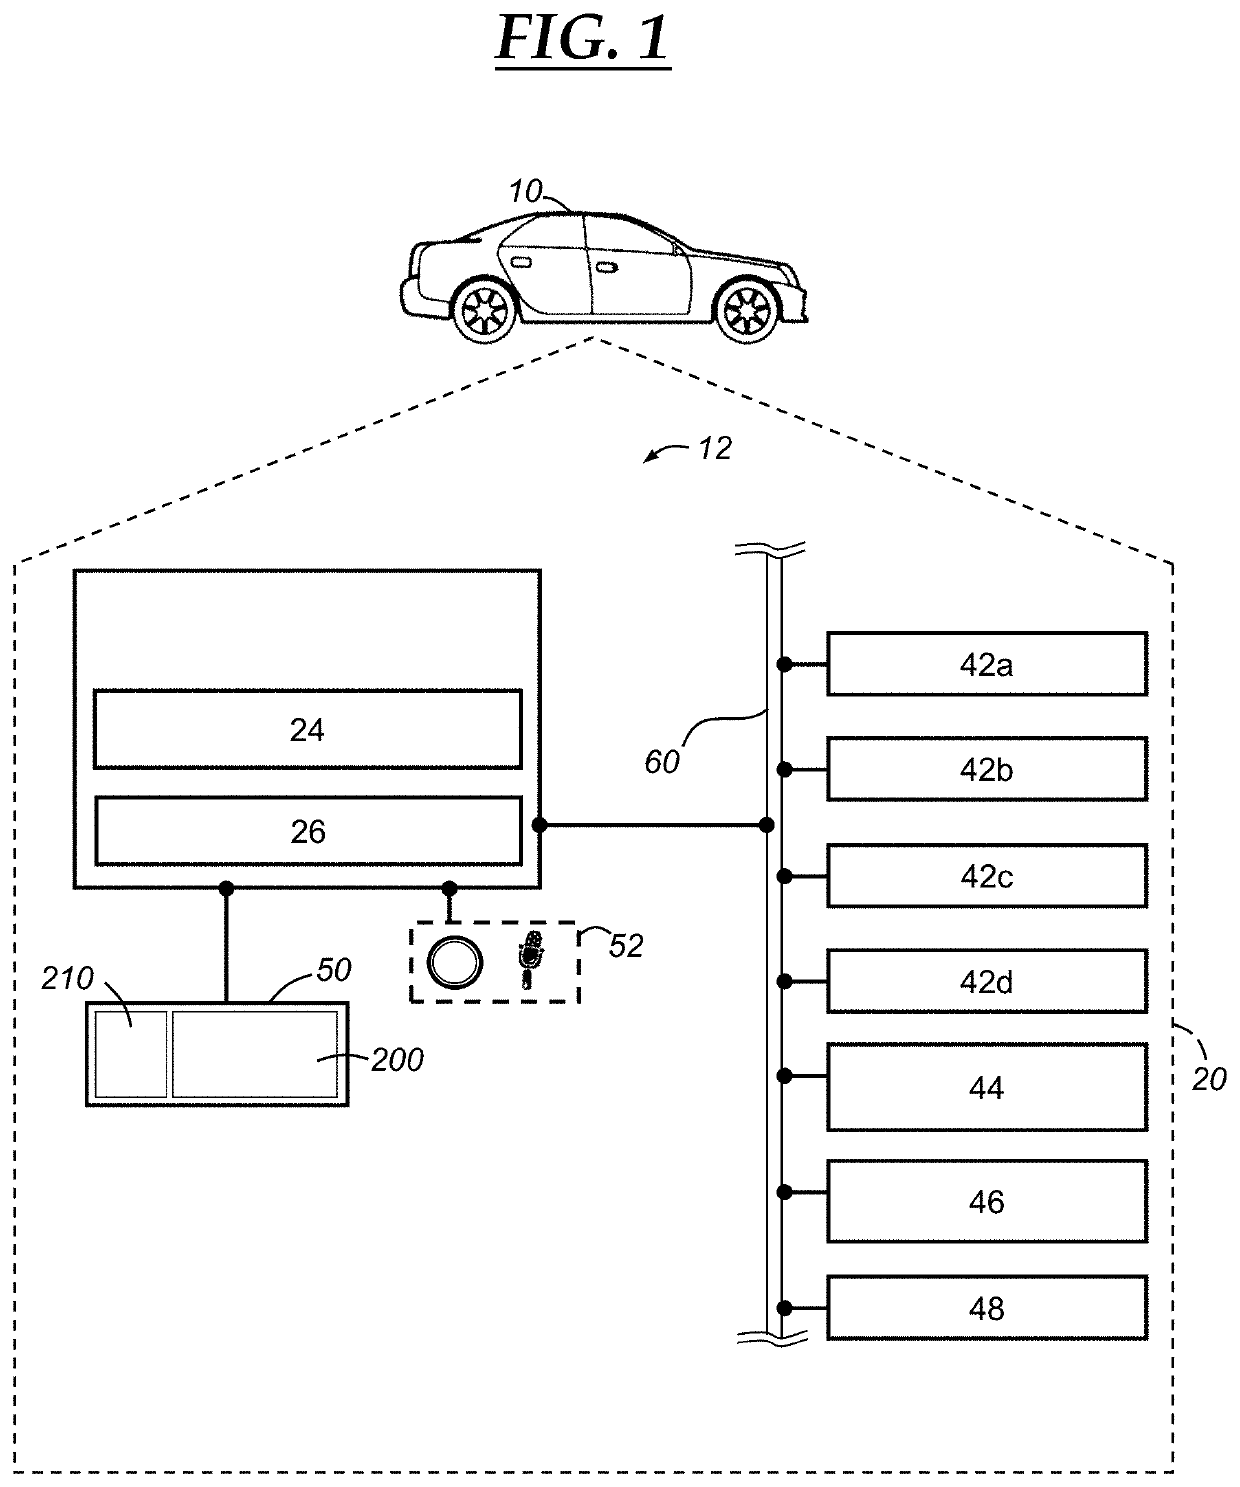 Vehicle imaging system and method for a parking solution